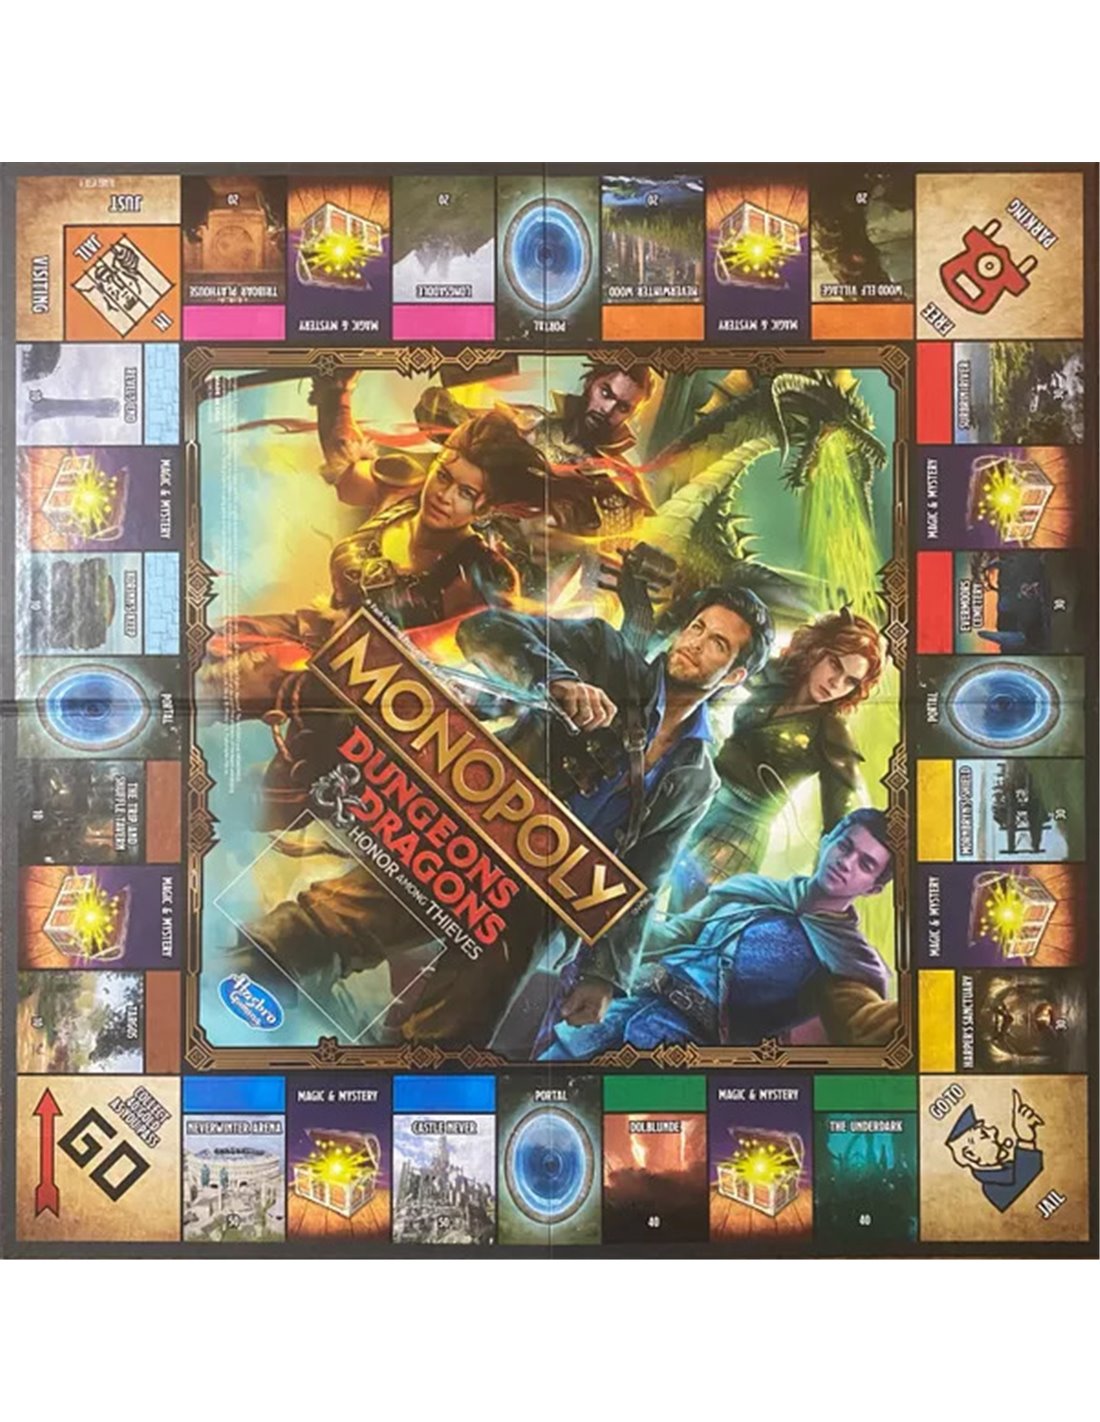 Monopoly Dungeons And Dragons Board Game